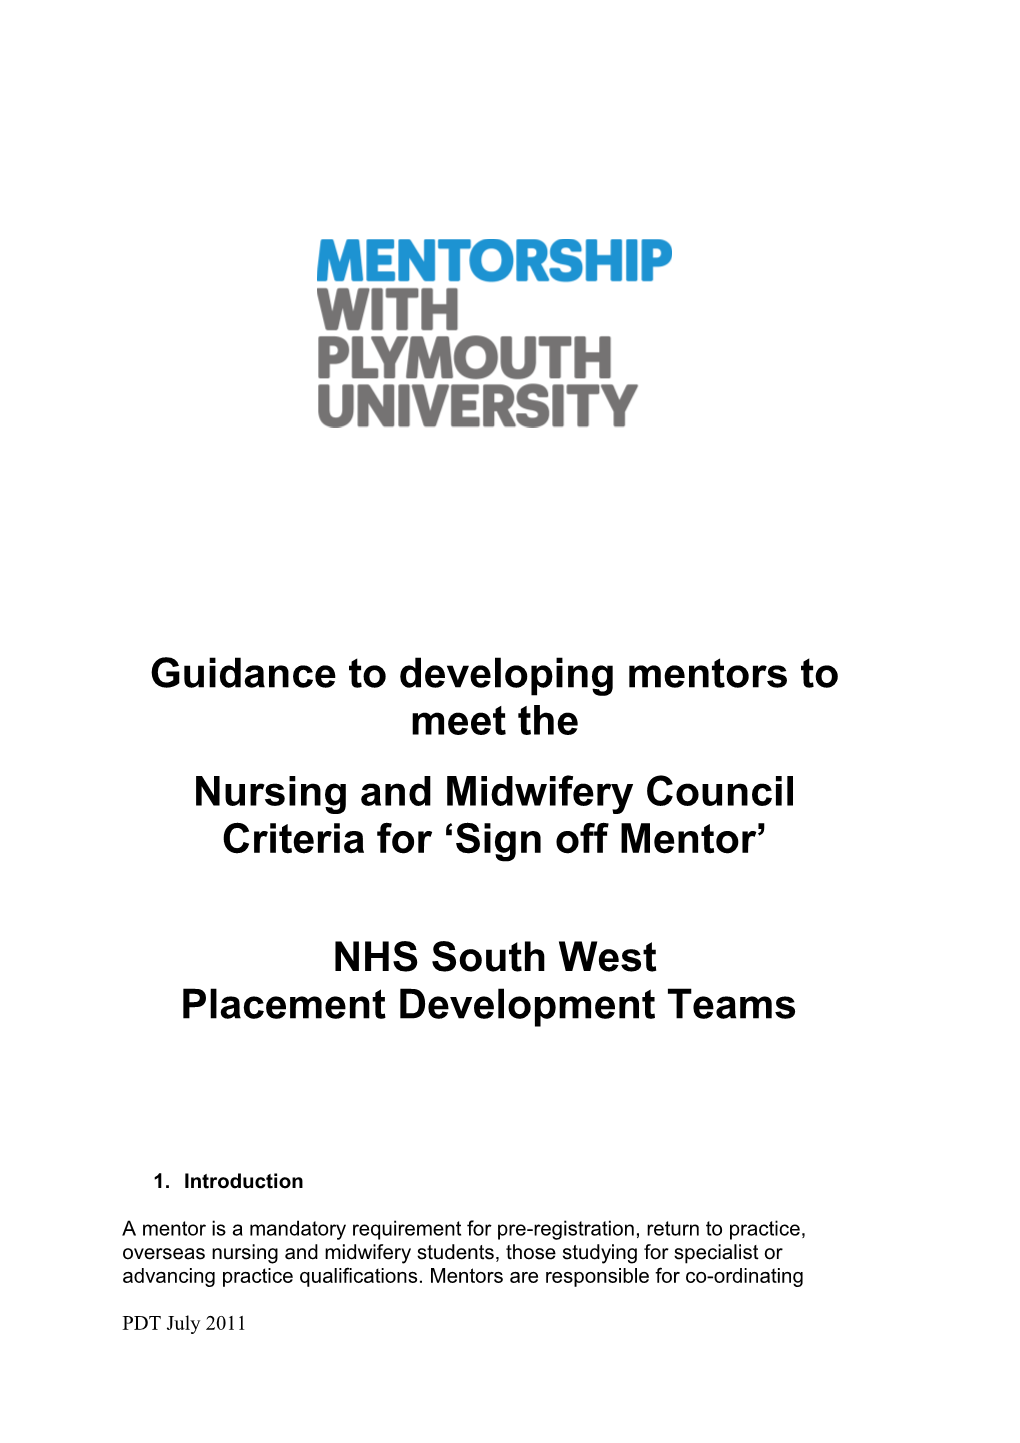 Guidance to Developing Mentors to Meet The